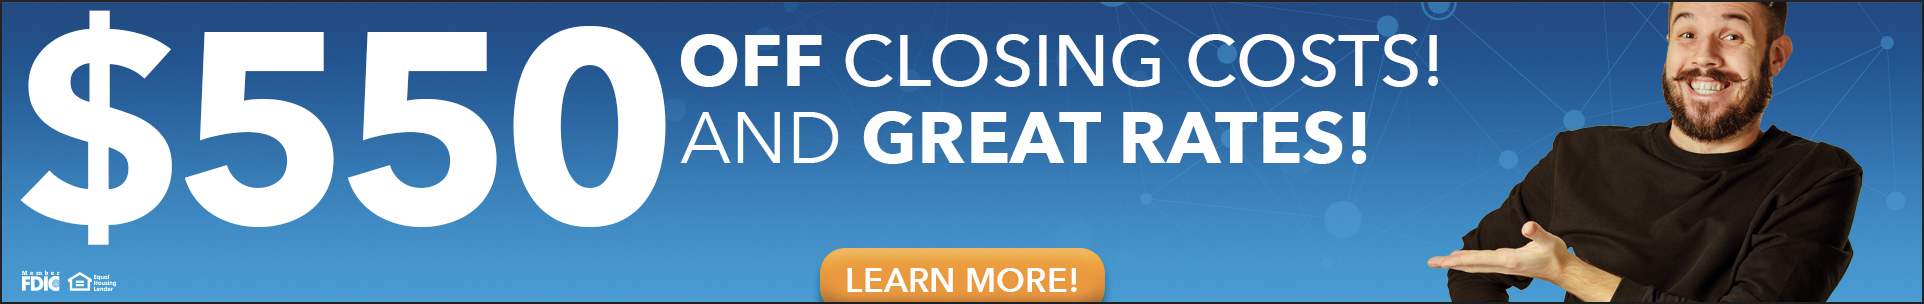 Mortgage Closing Cost promotion - header image